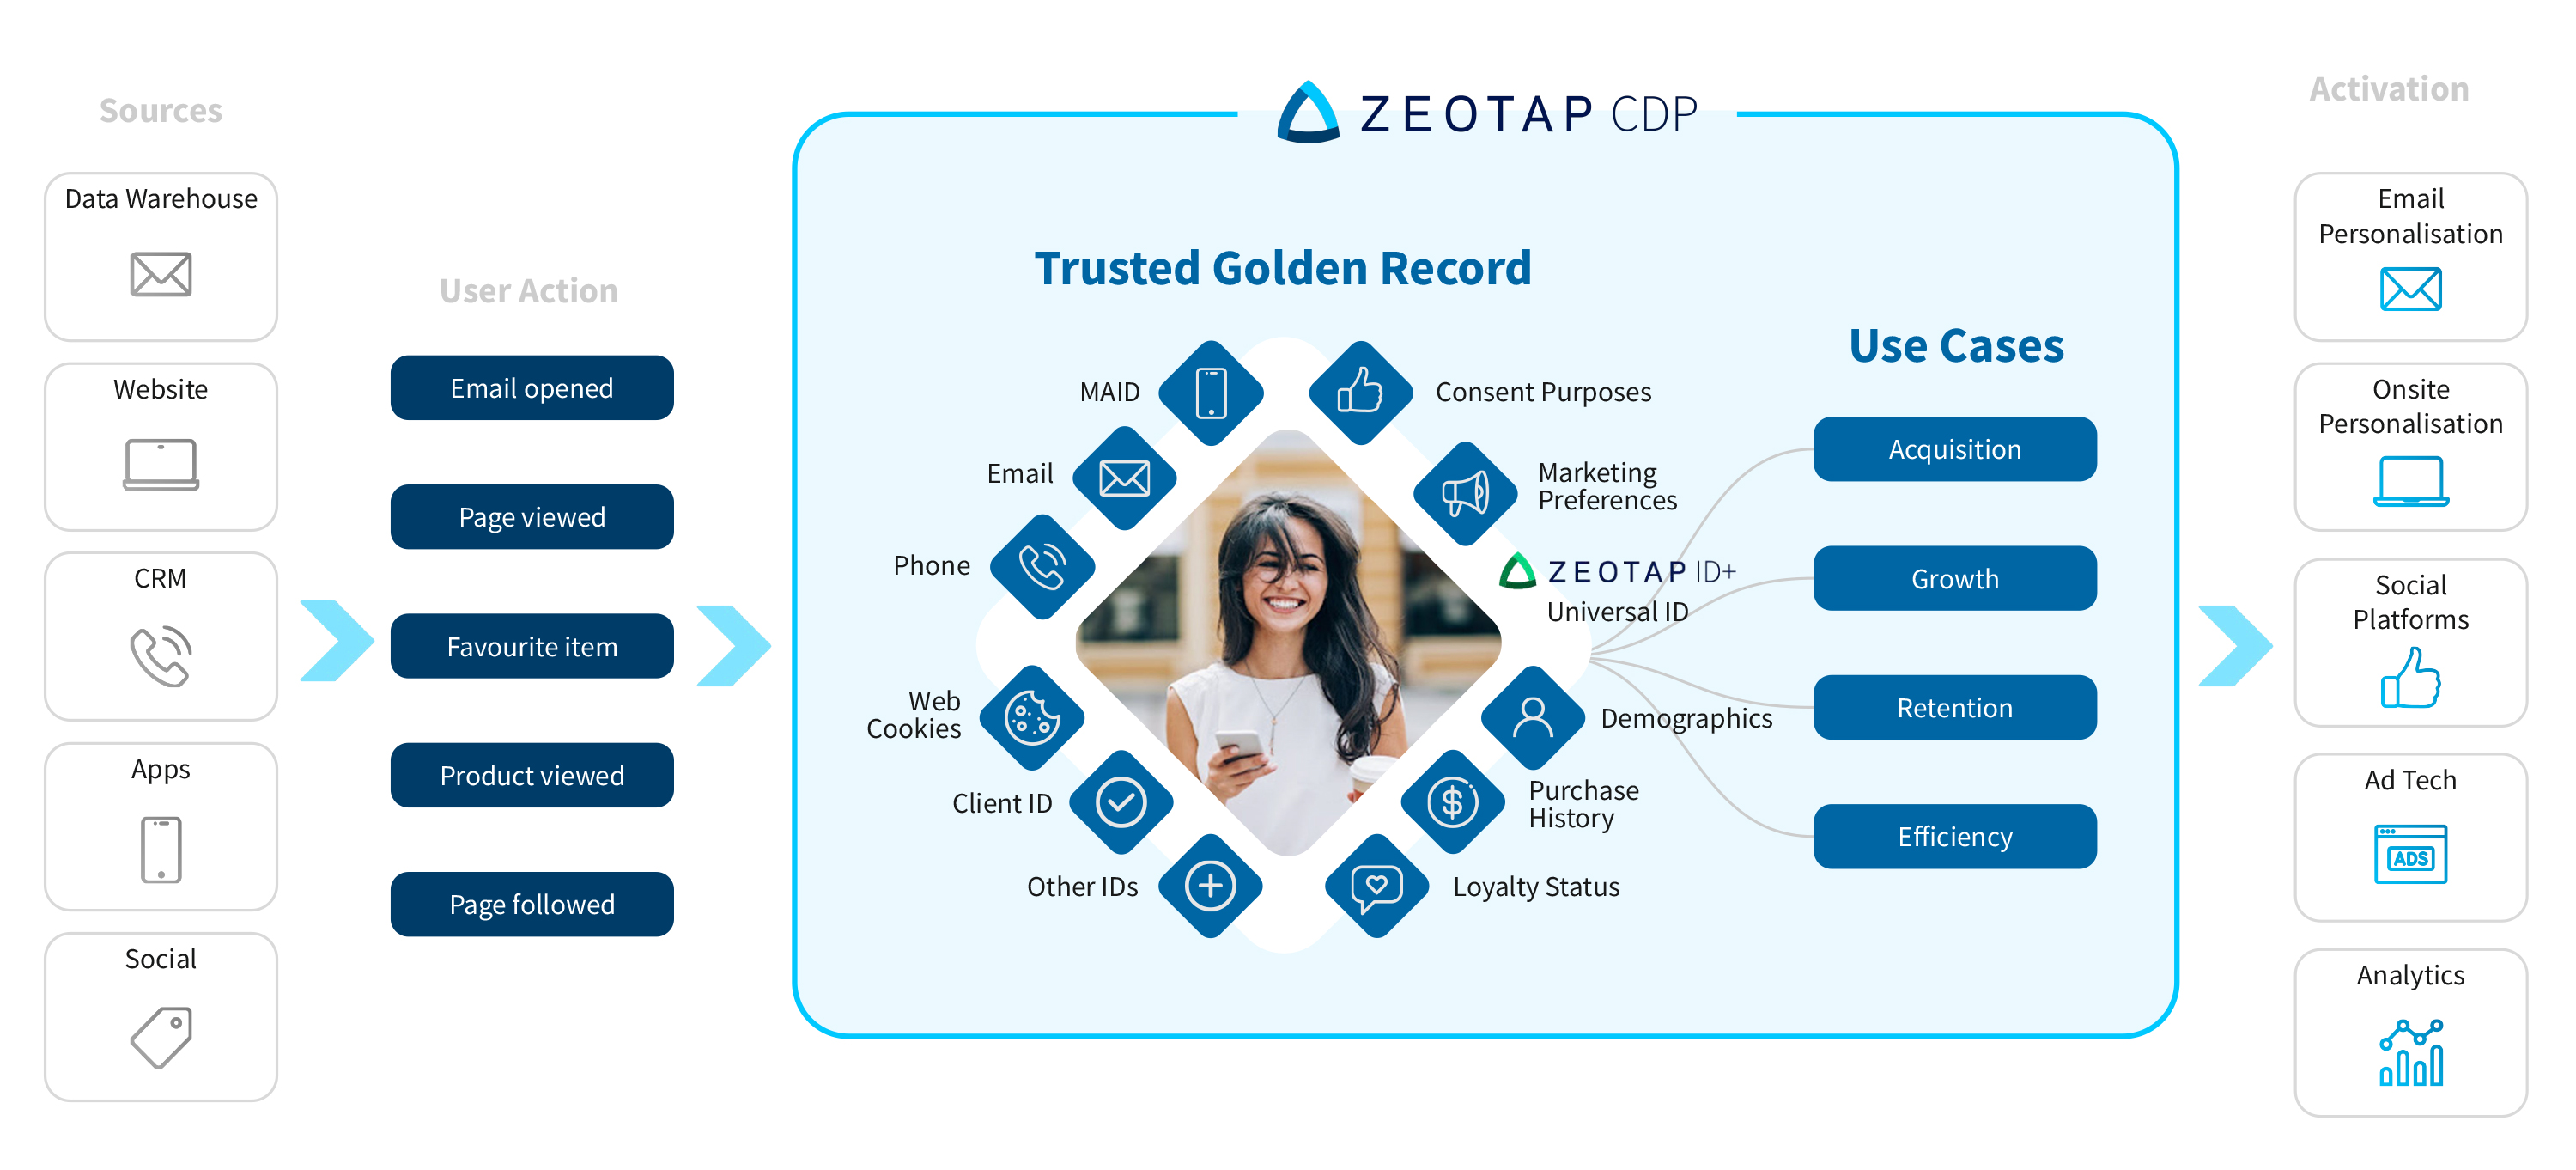 Zeotap's integration with Optimizely